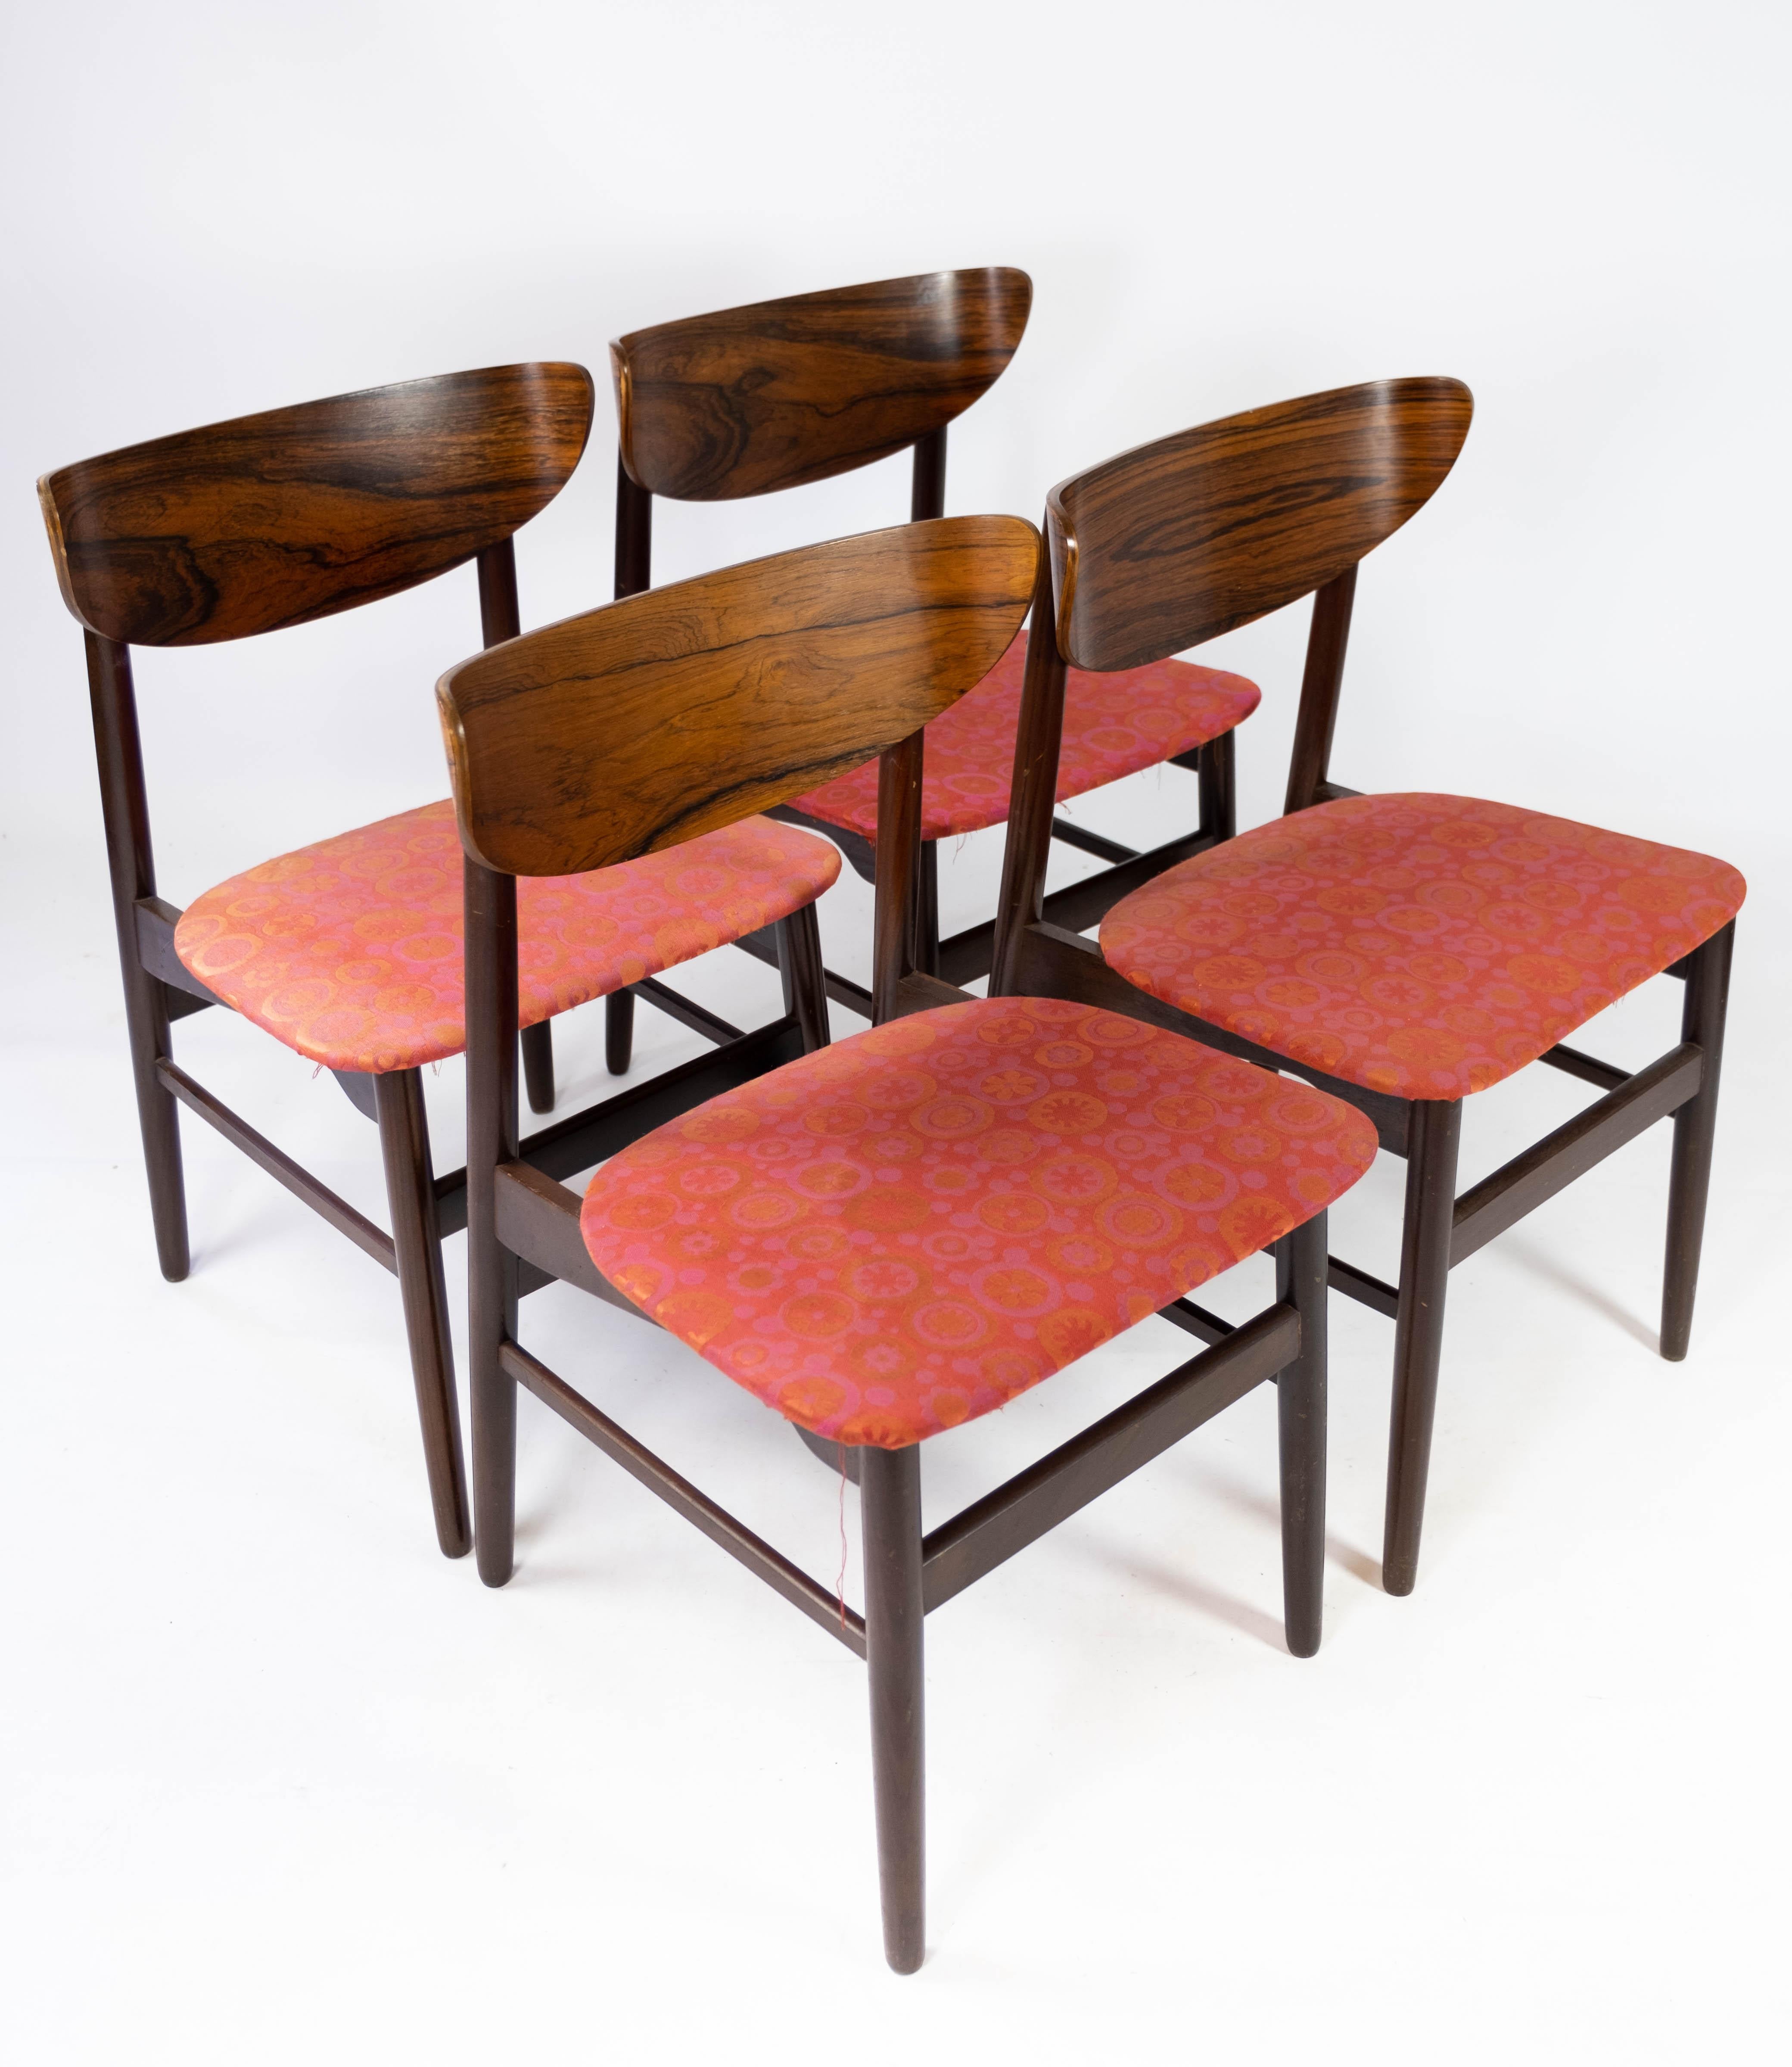 Set of Four Dining Room Chairs in Rosewood, of Danish Design, 1960s In Good Condition For Sale In Lejre, DK